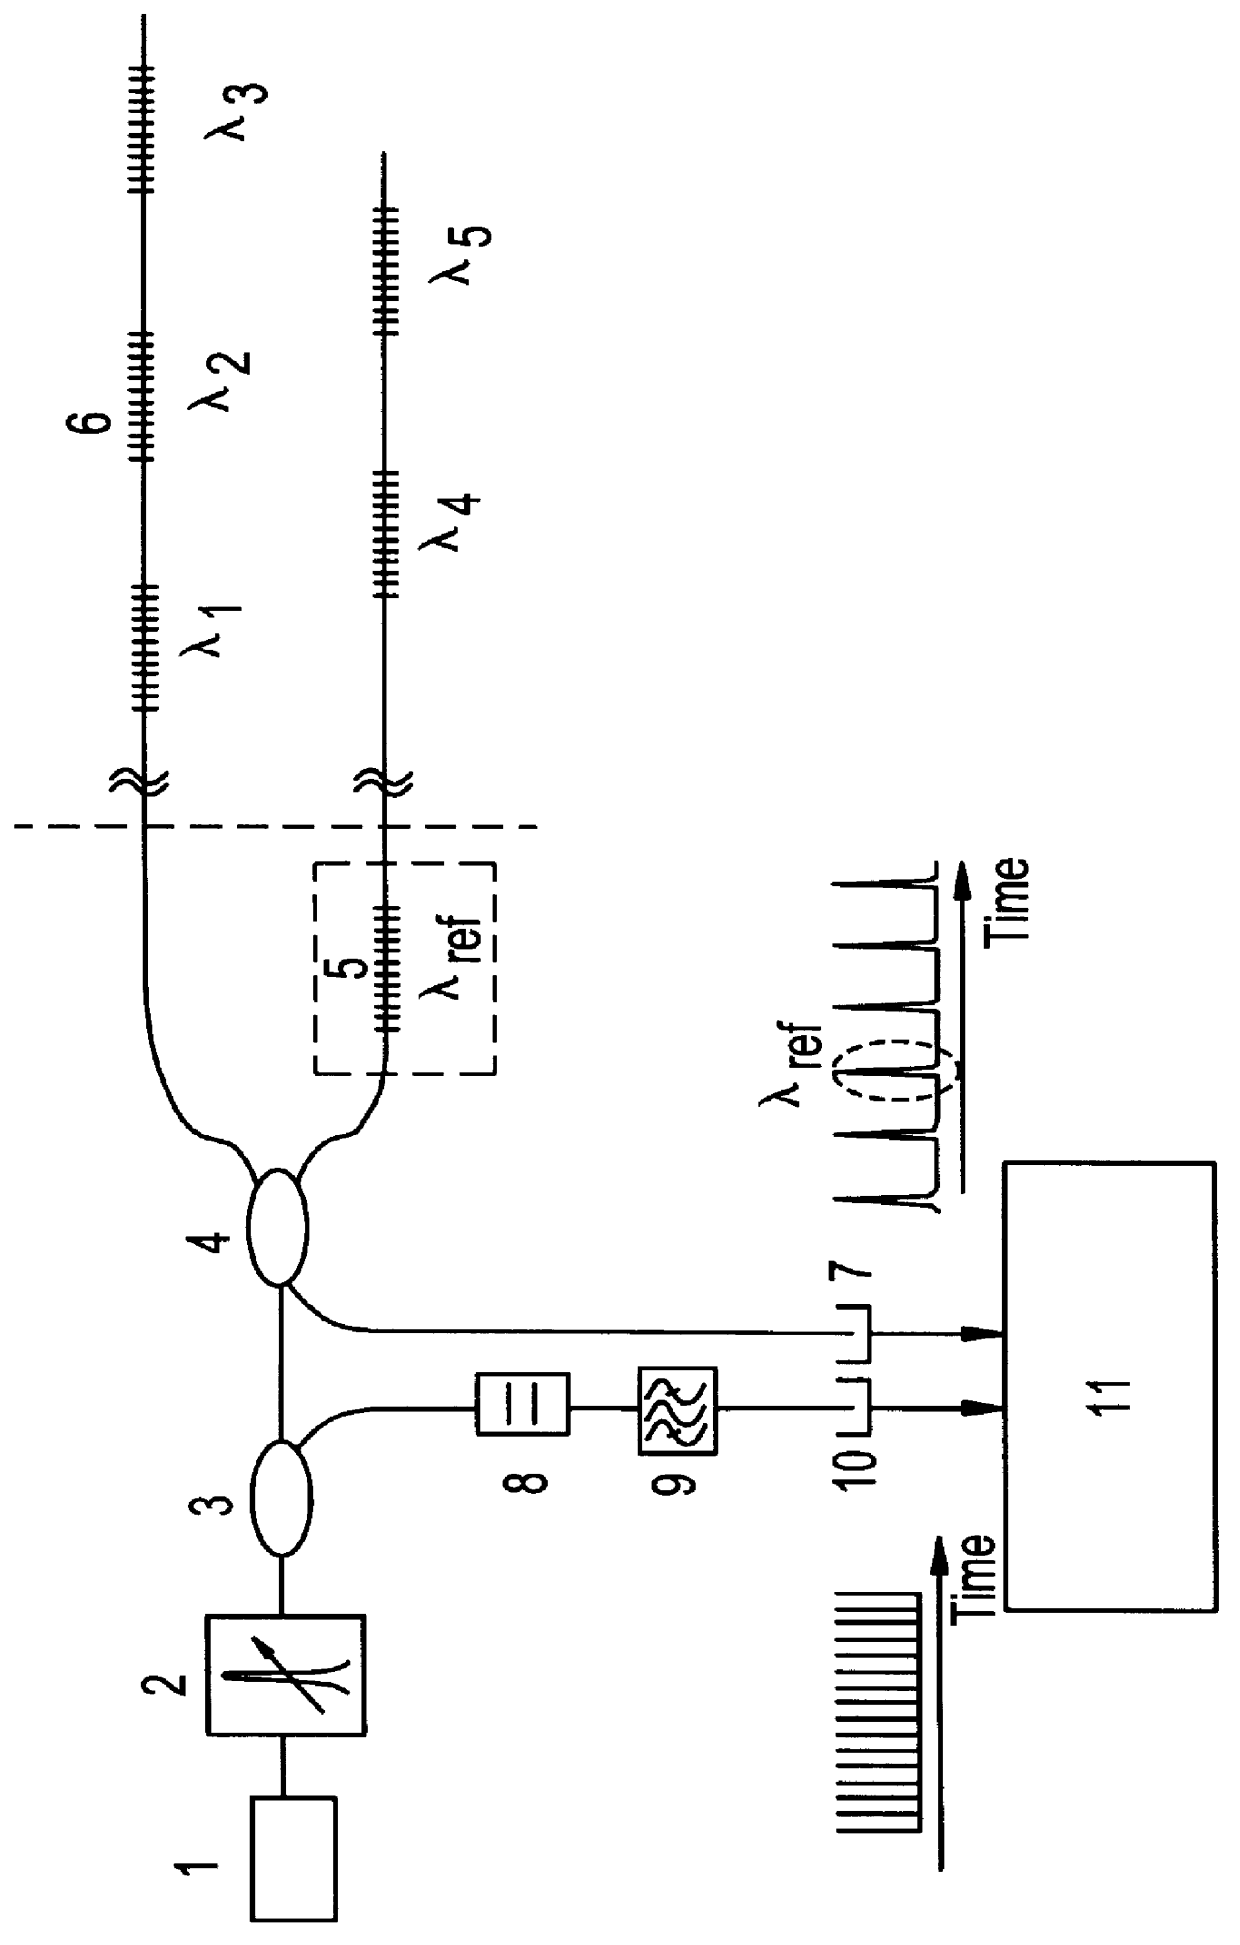 Device for measurement of optical wavelengths